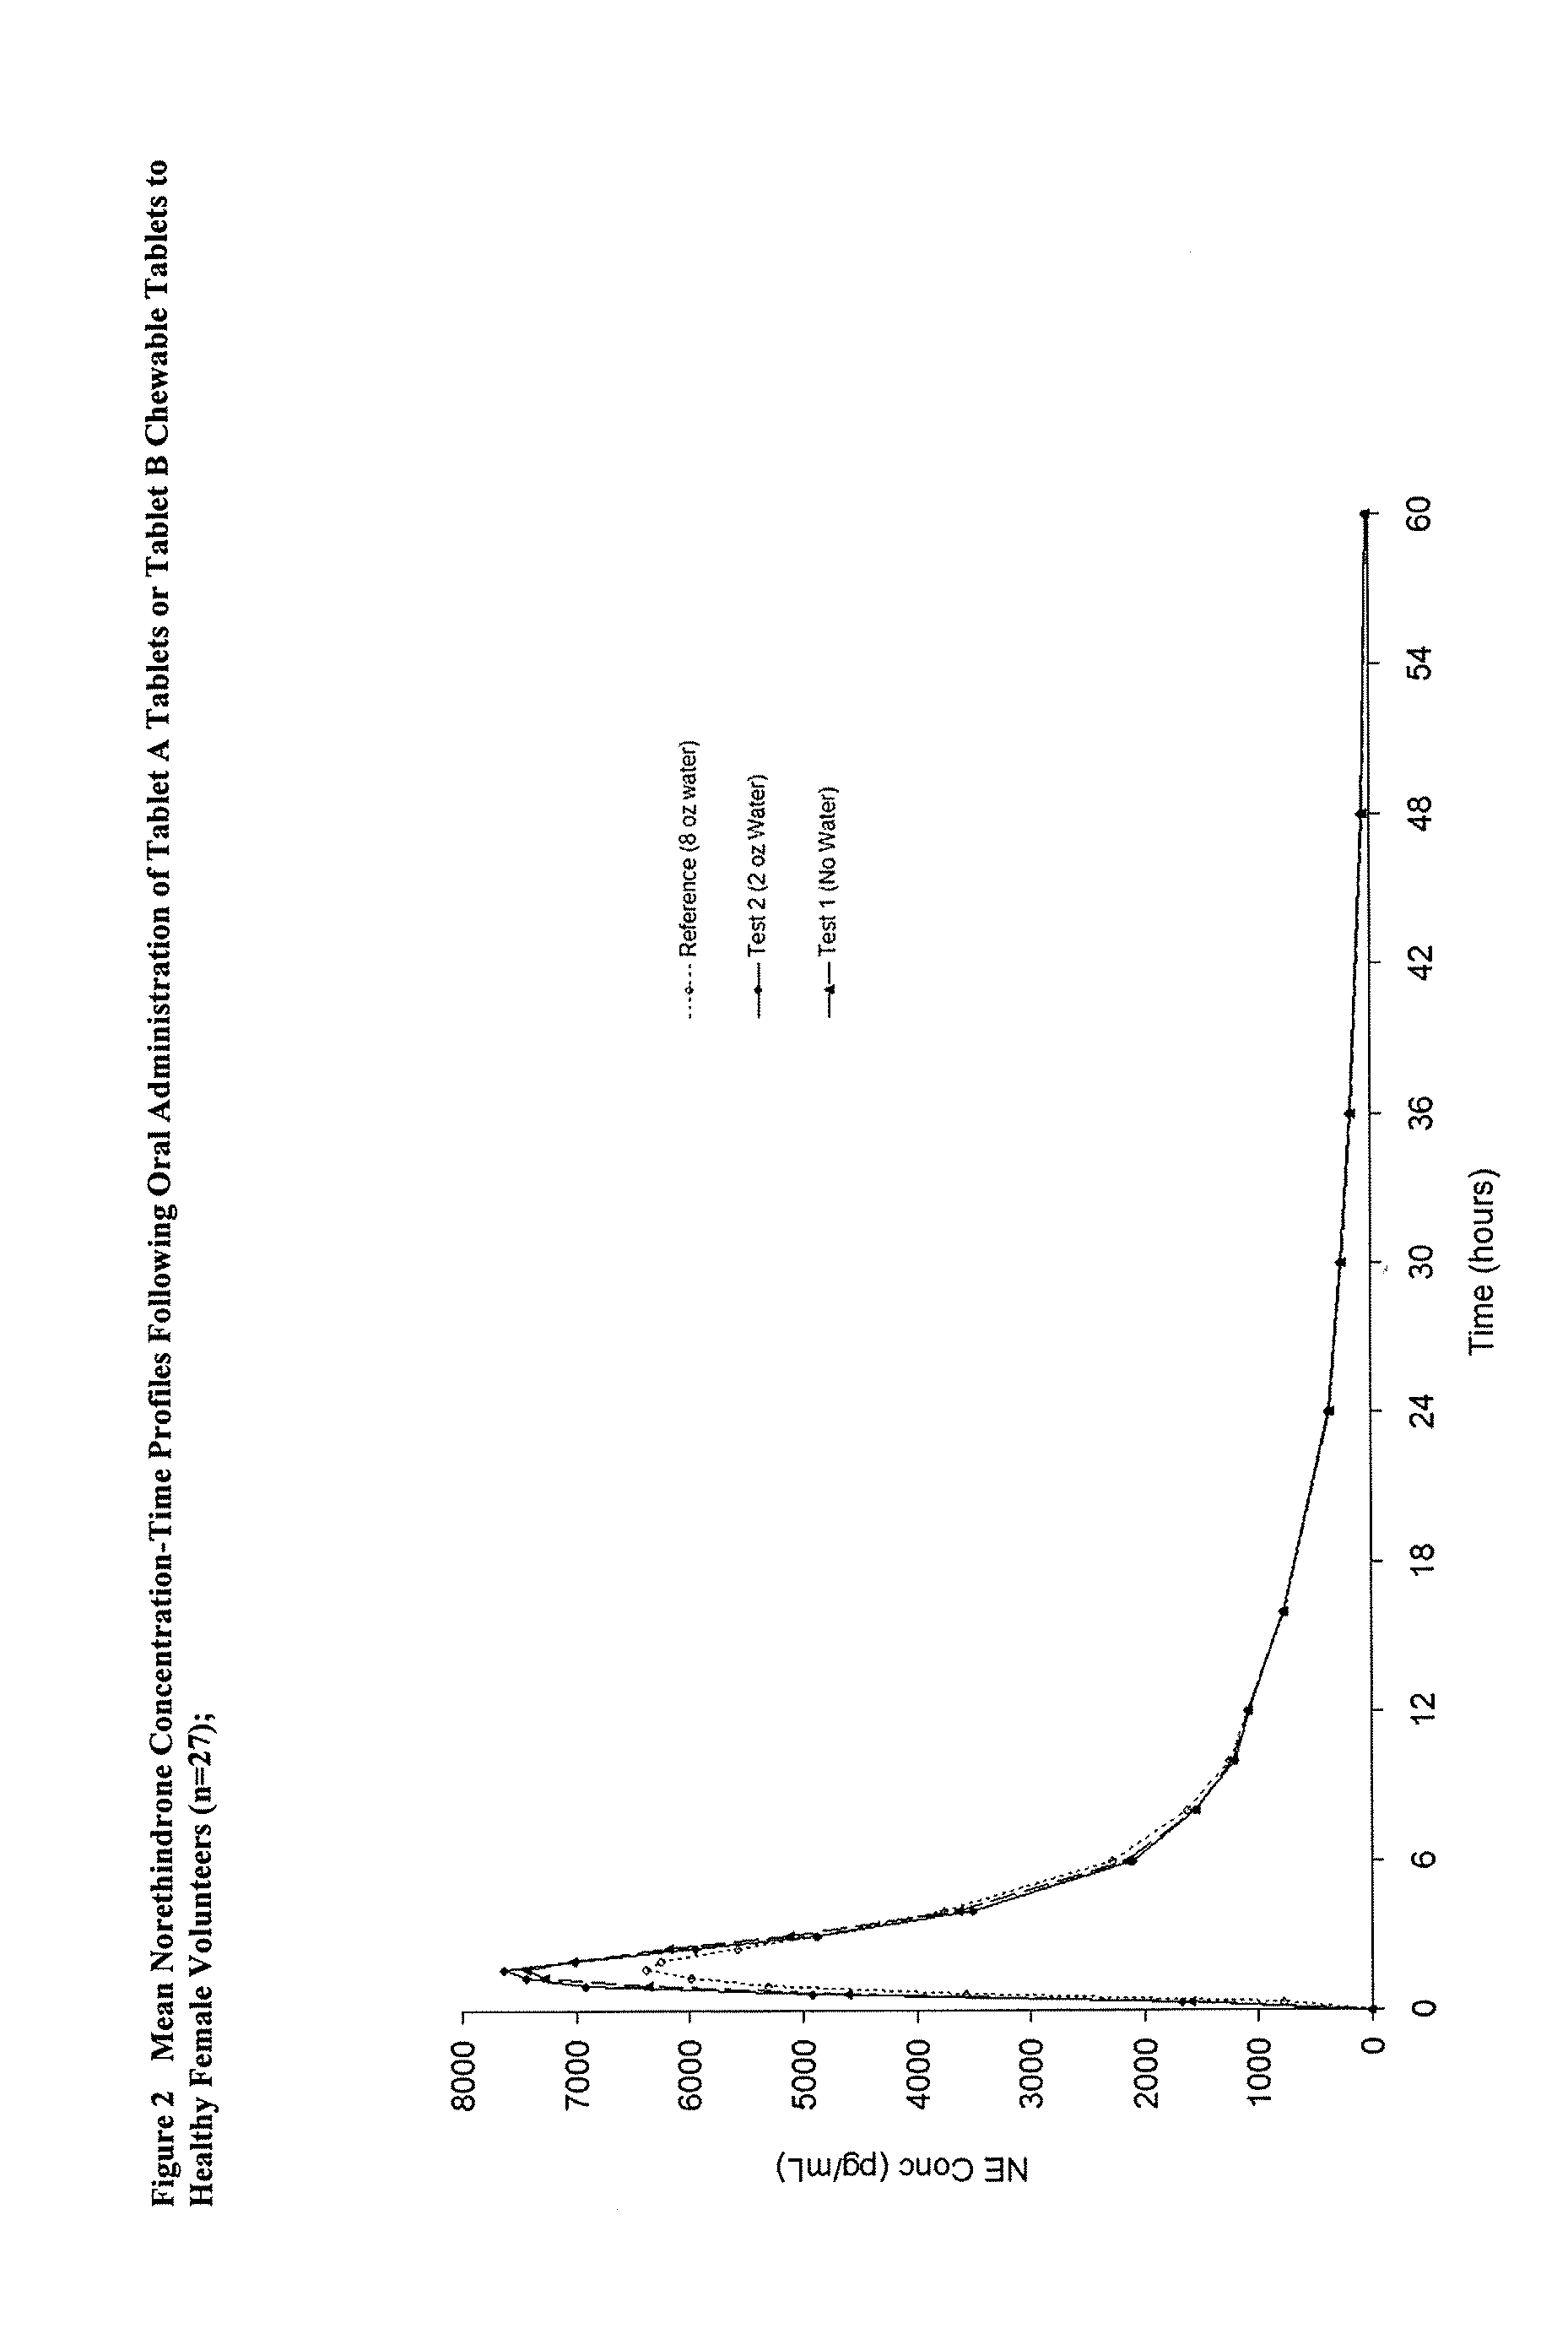 Methods to administer ethinyl estradiol and prodrugs thereof with improved bioavailability